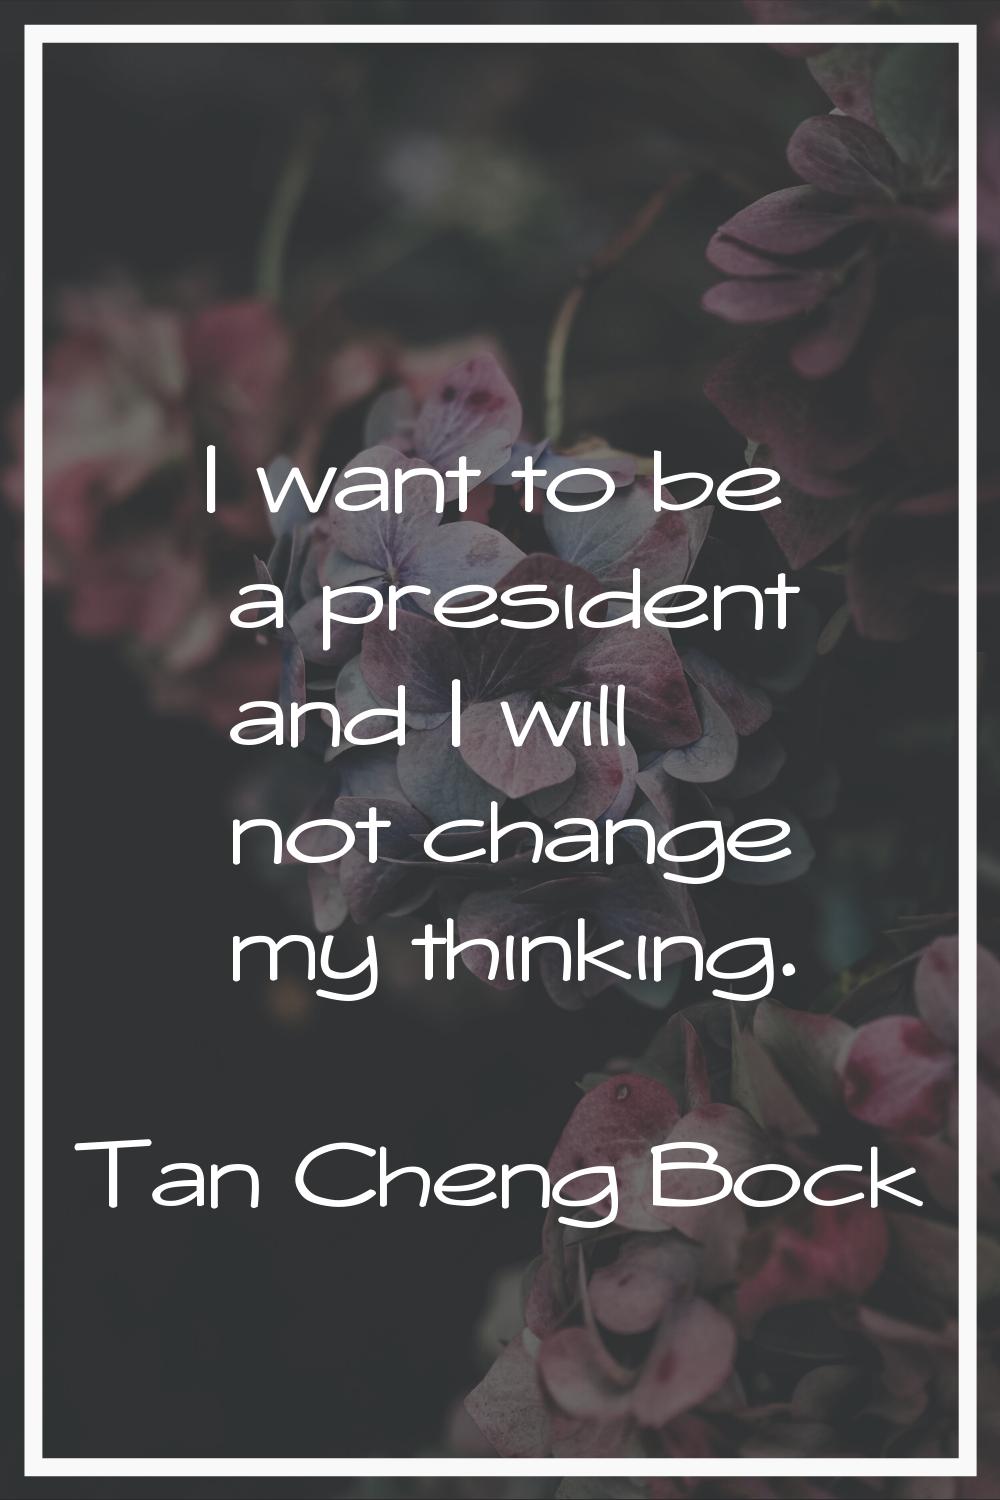 I want to be a president and I will not change my thinking.